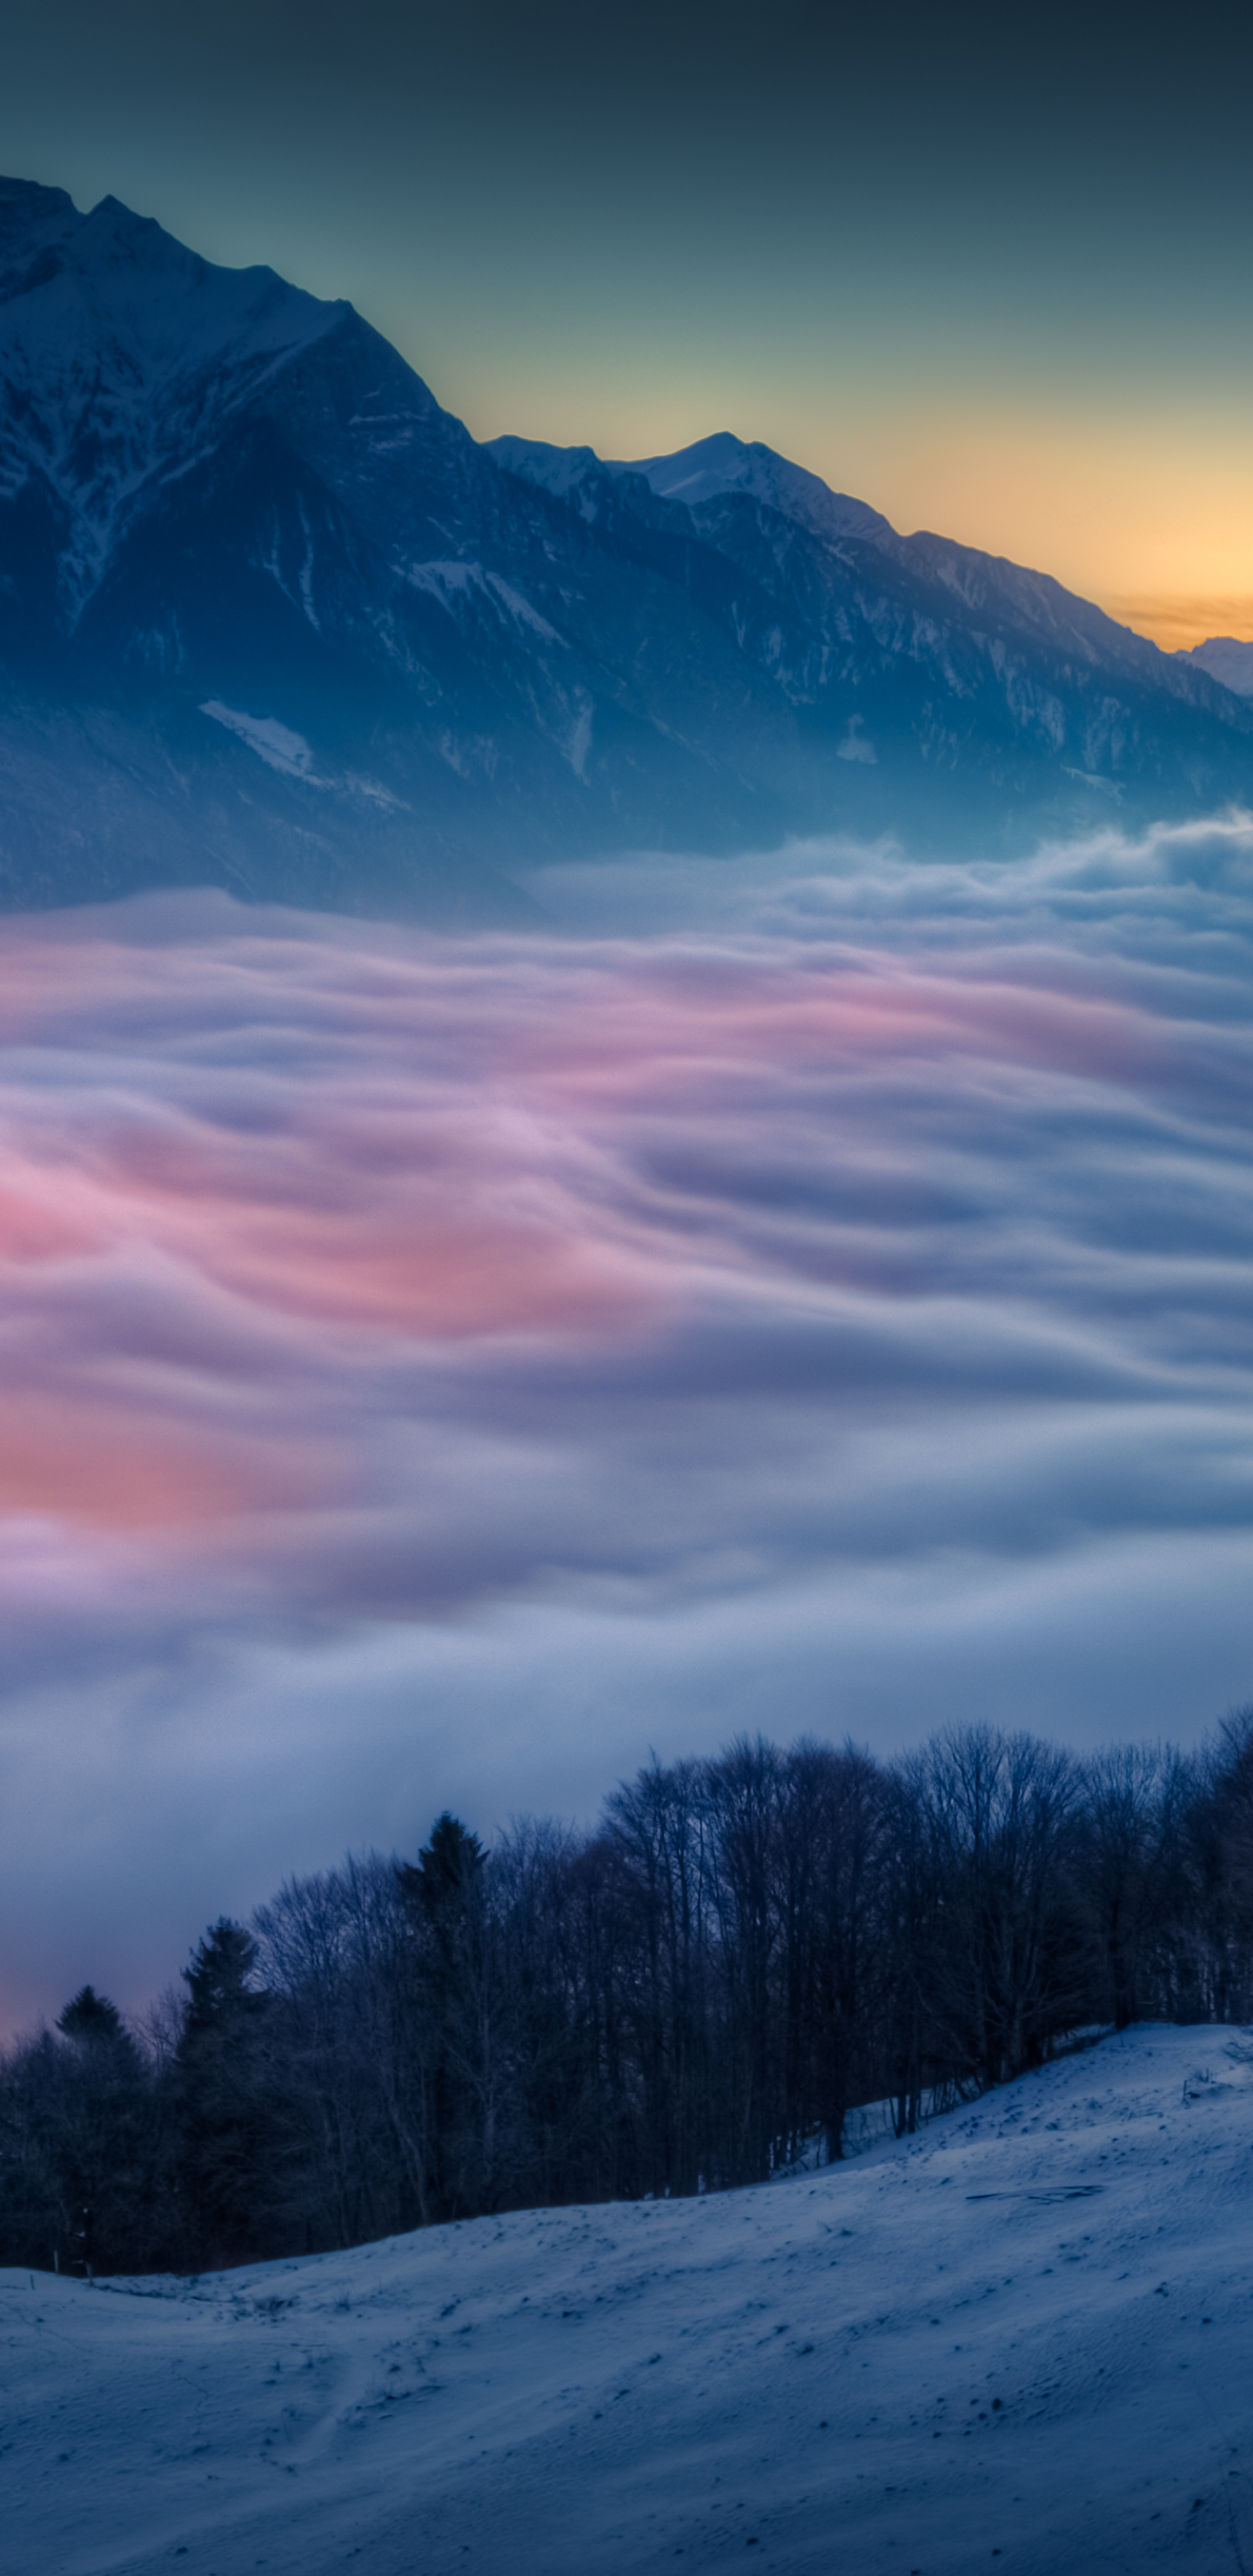 Low Clouds over a Swiss Town in the Evening by David Kaplan